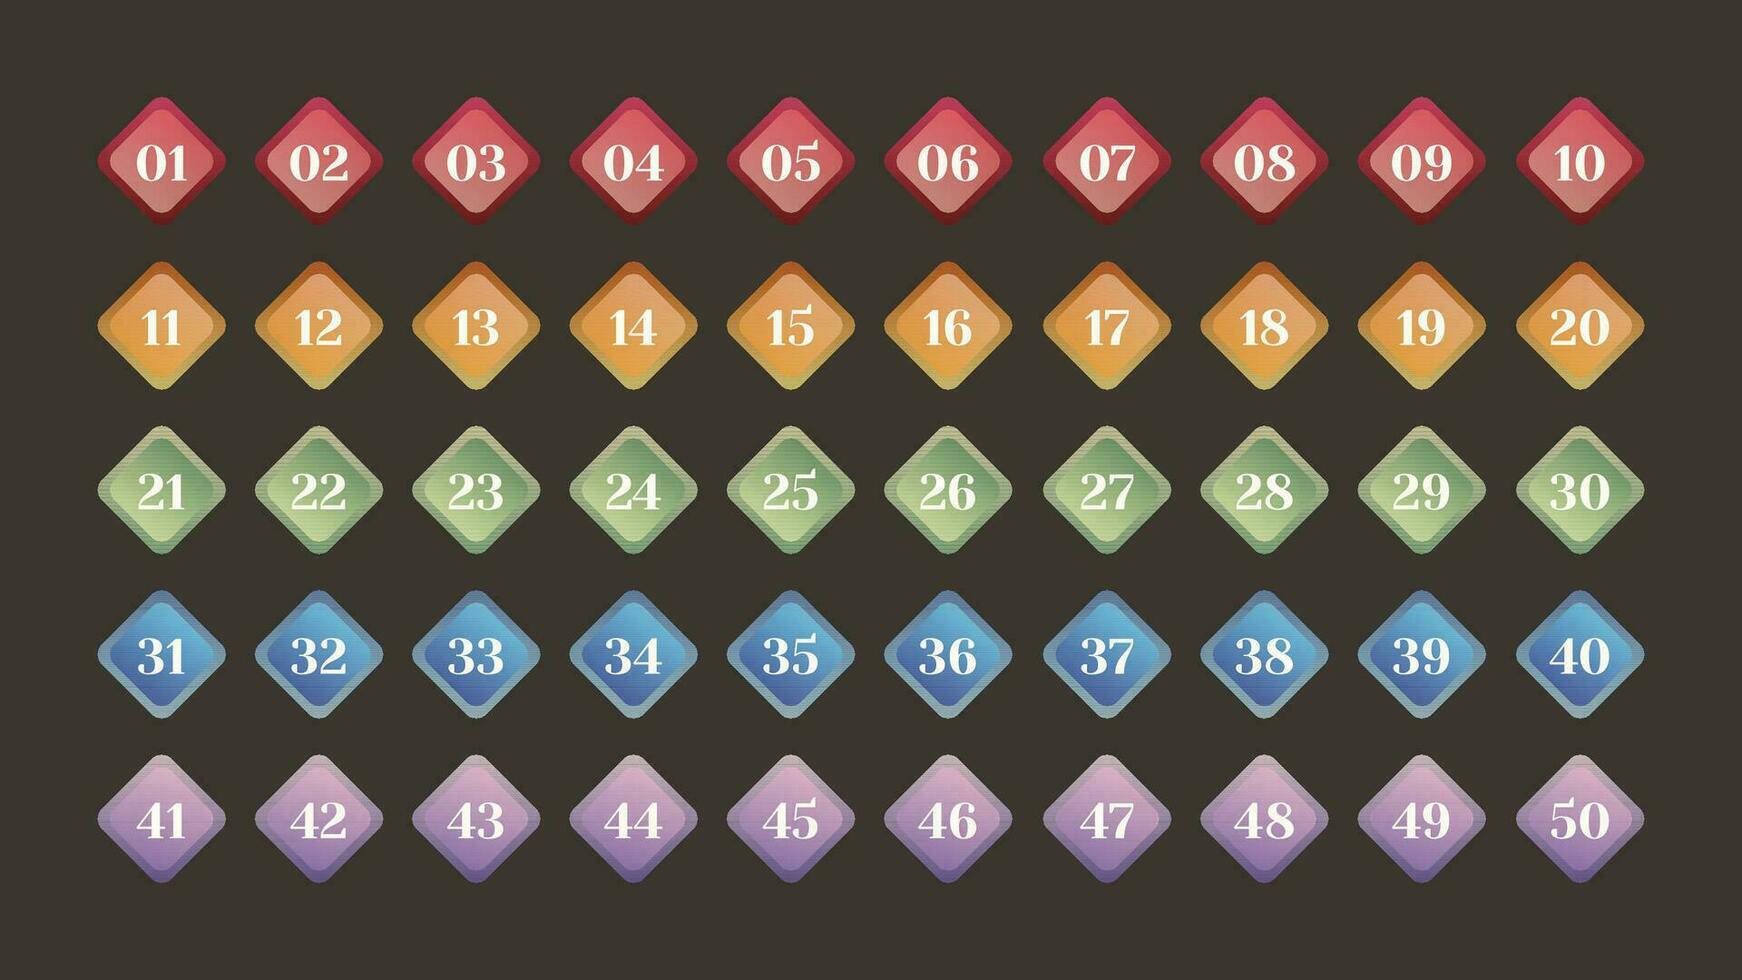 Diamond Shape Frame Numbering From 1 To 50. Outline Color Markers For Infographic Design Elements Set vector